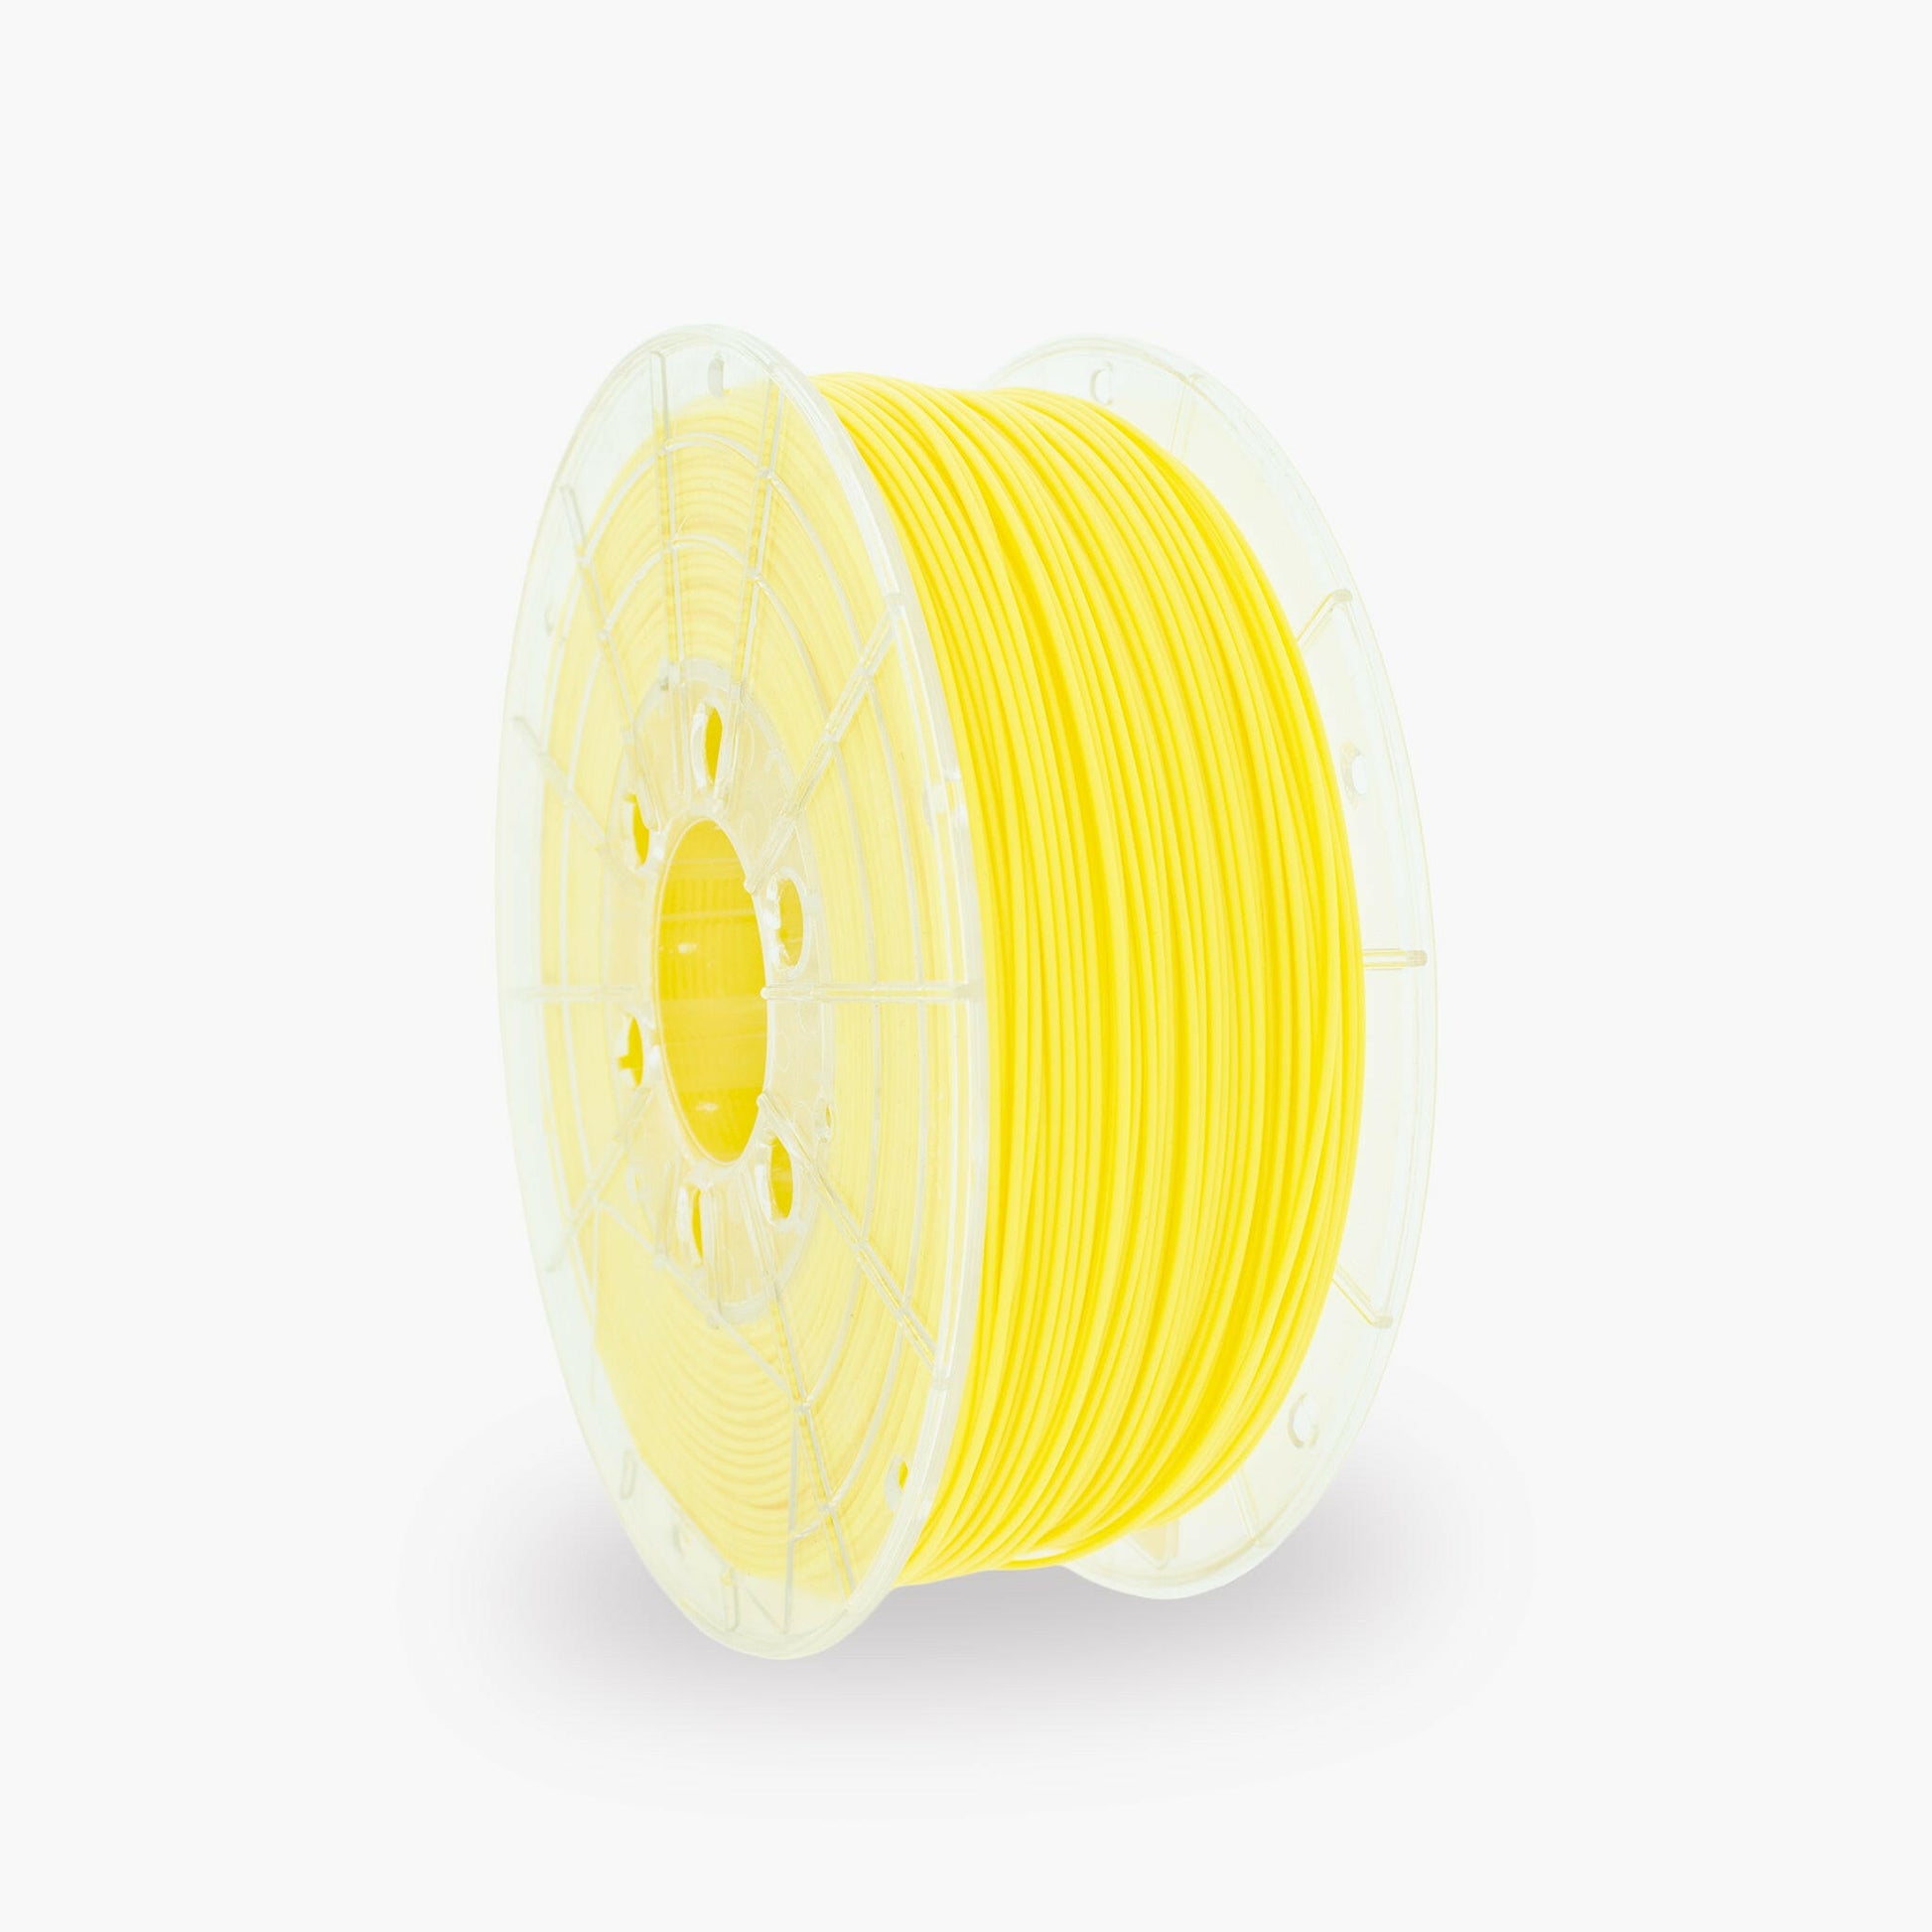 Sulfur Yellow PLA 3D Printer Filament with a diameter of 1.75mm on a 1KG Spool.